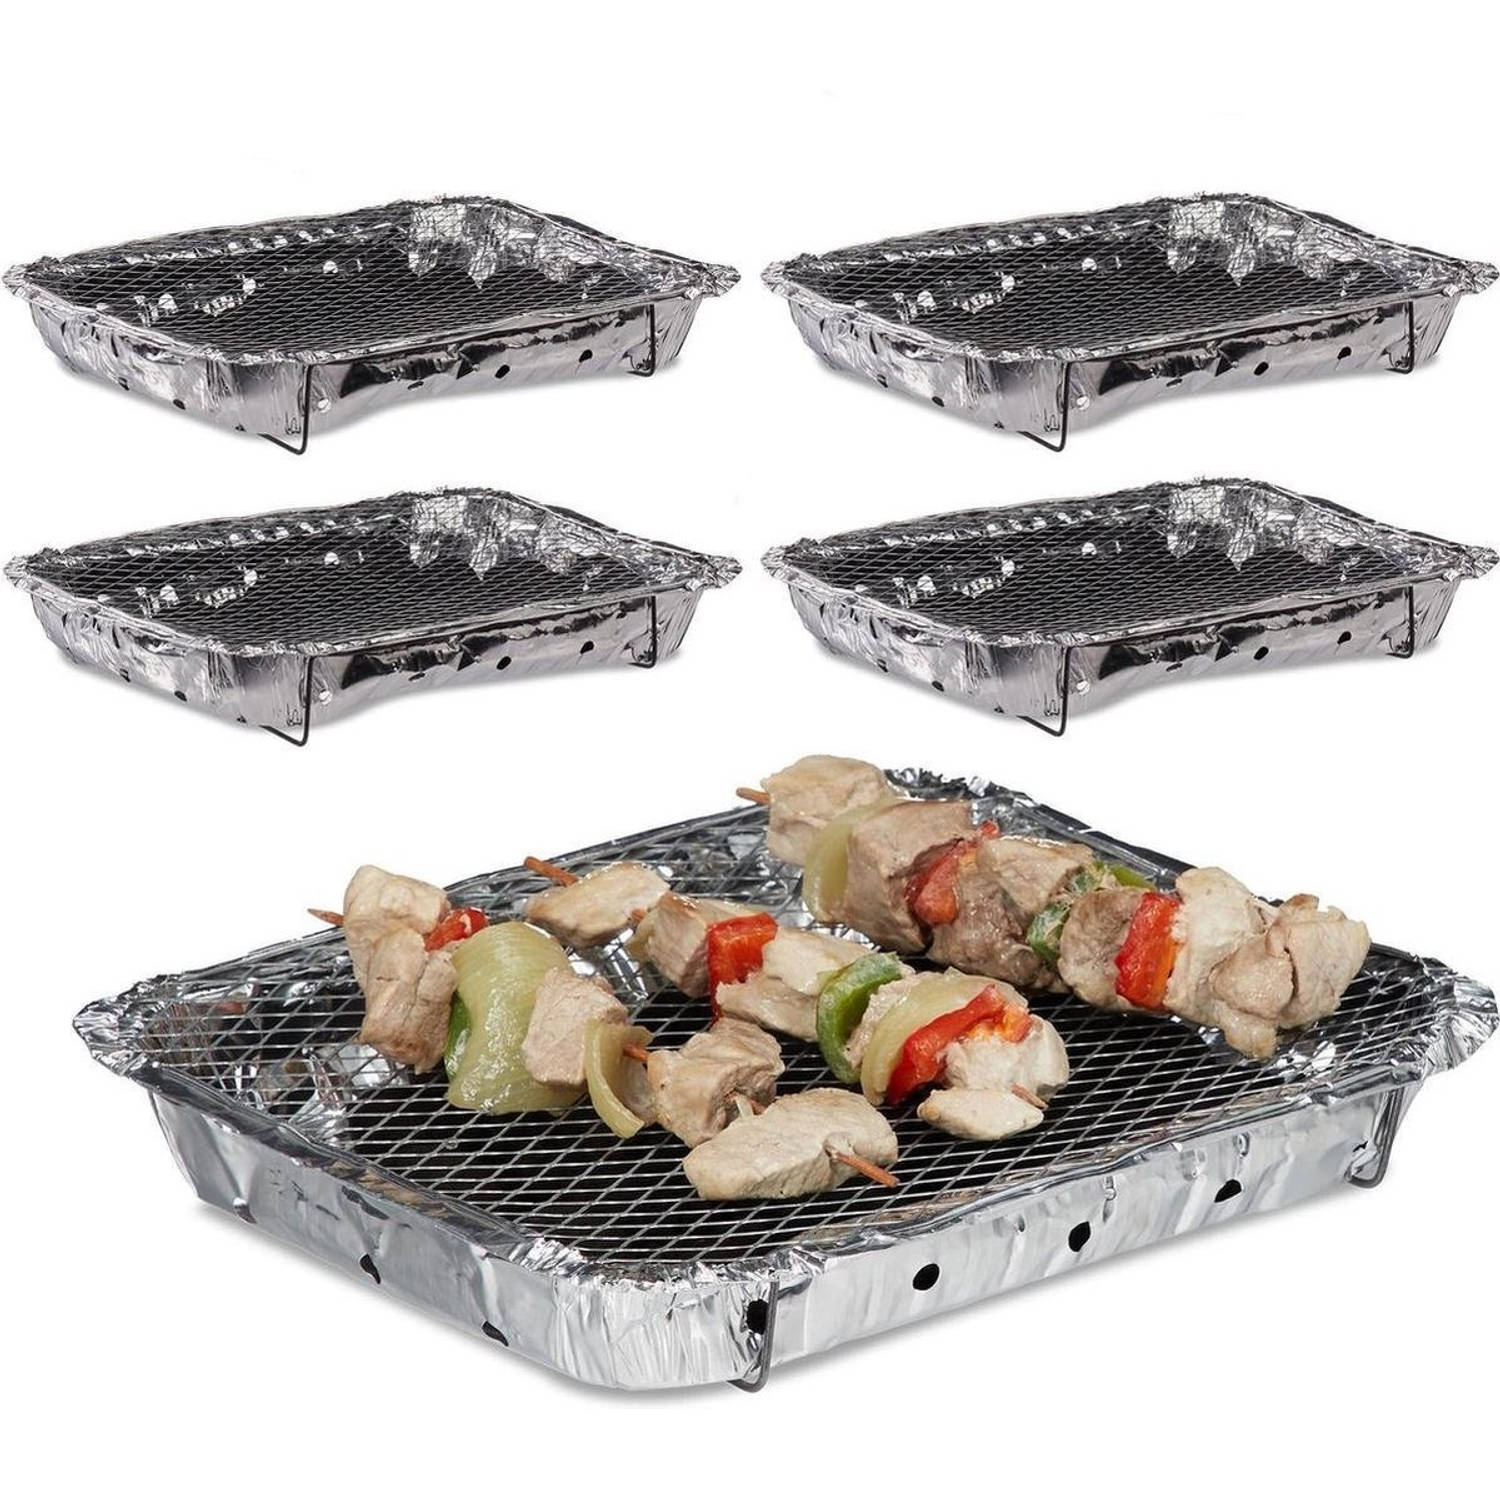 5 Stuks Barbecue - Instant - Wegwerp - Buiten Barbecue - Tafel - Rooster - Picknick - Barbecue Acces